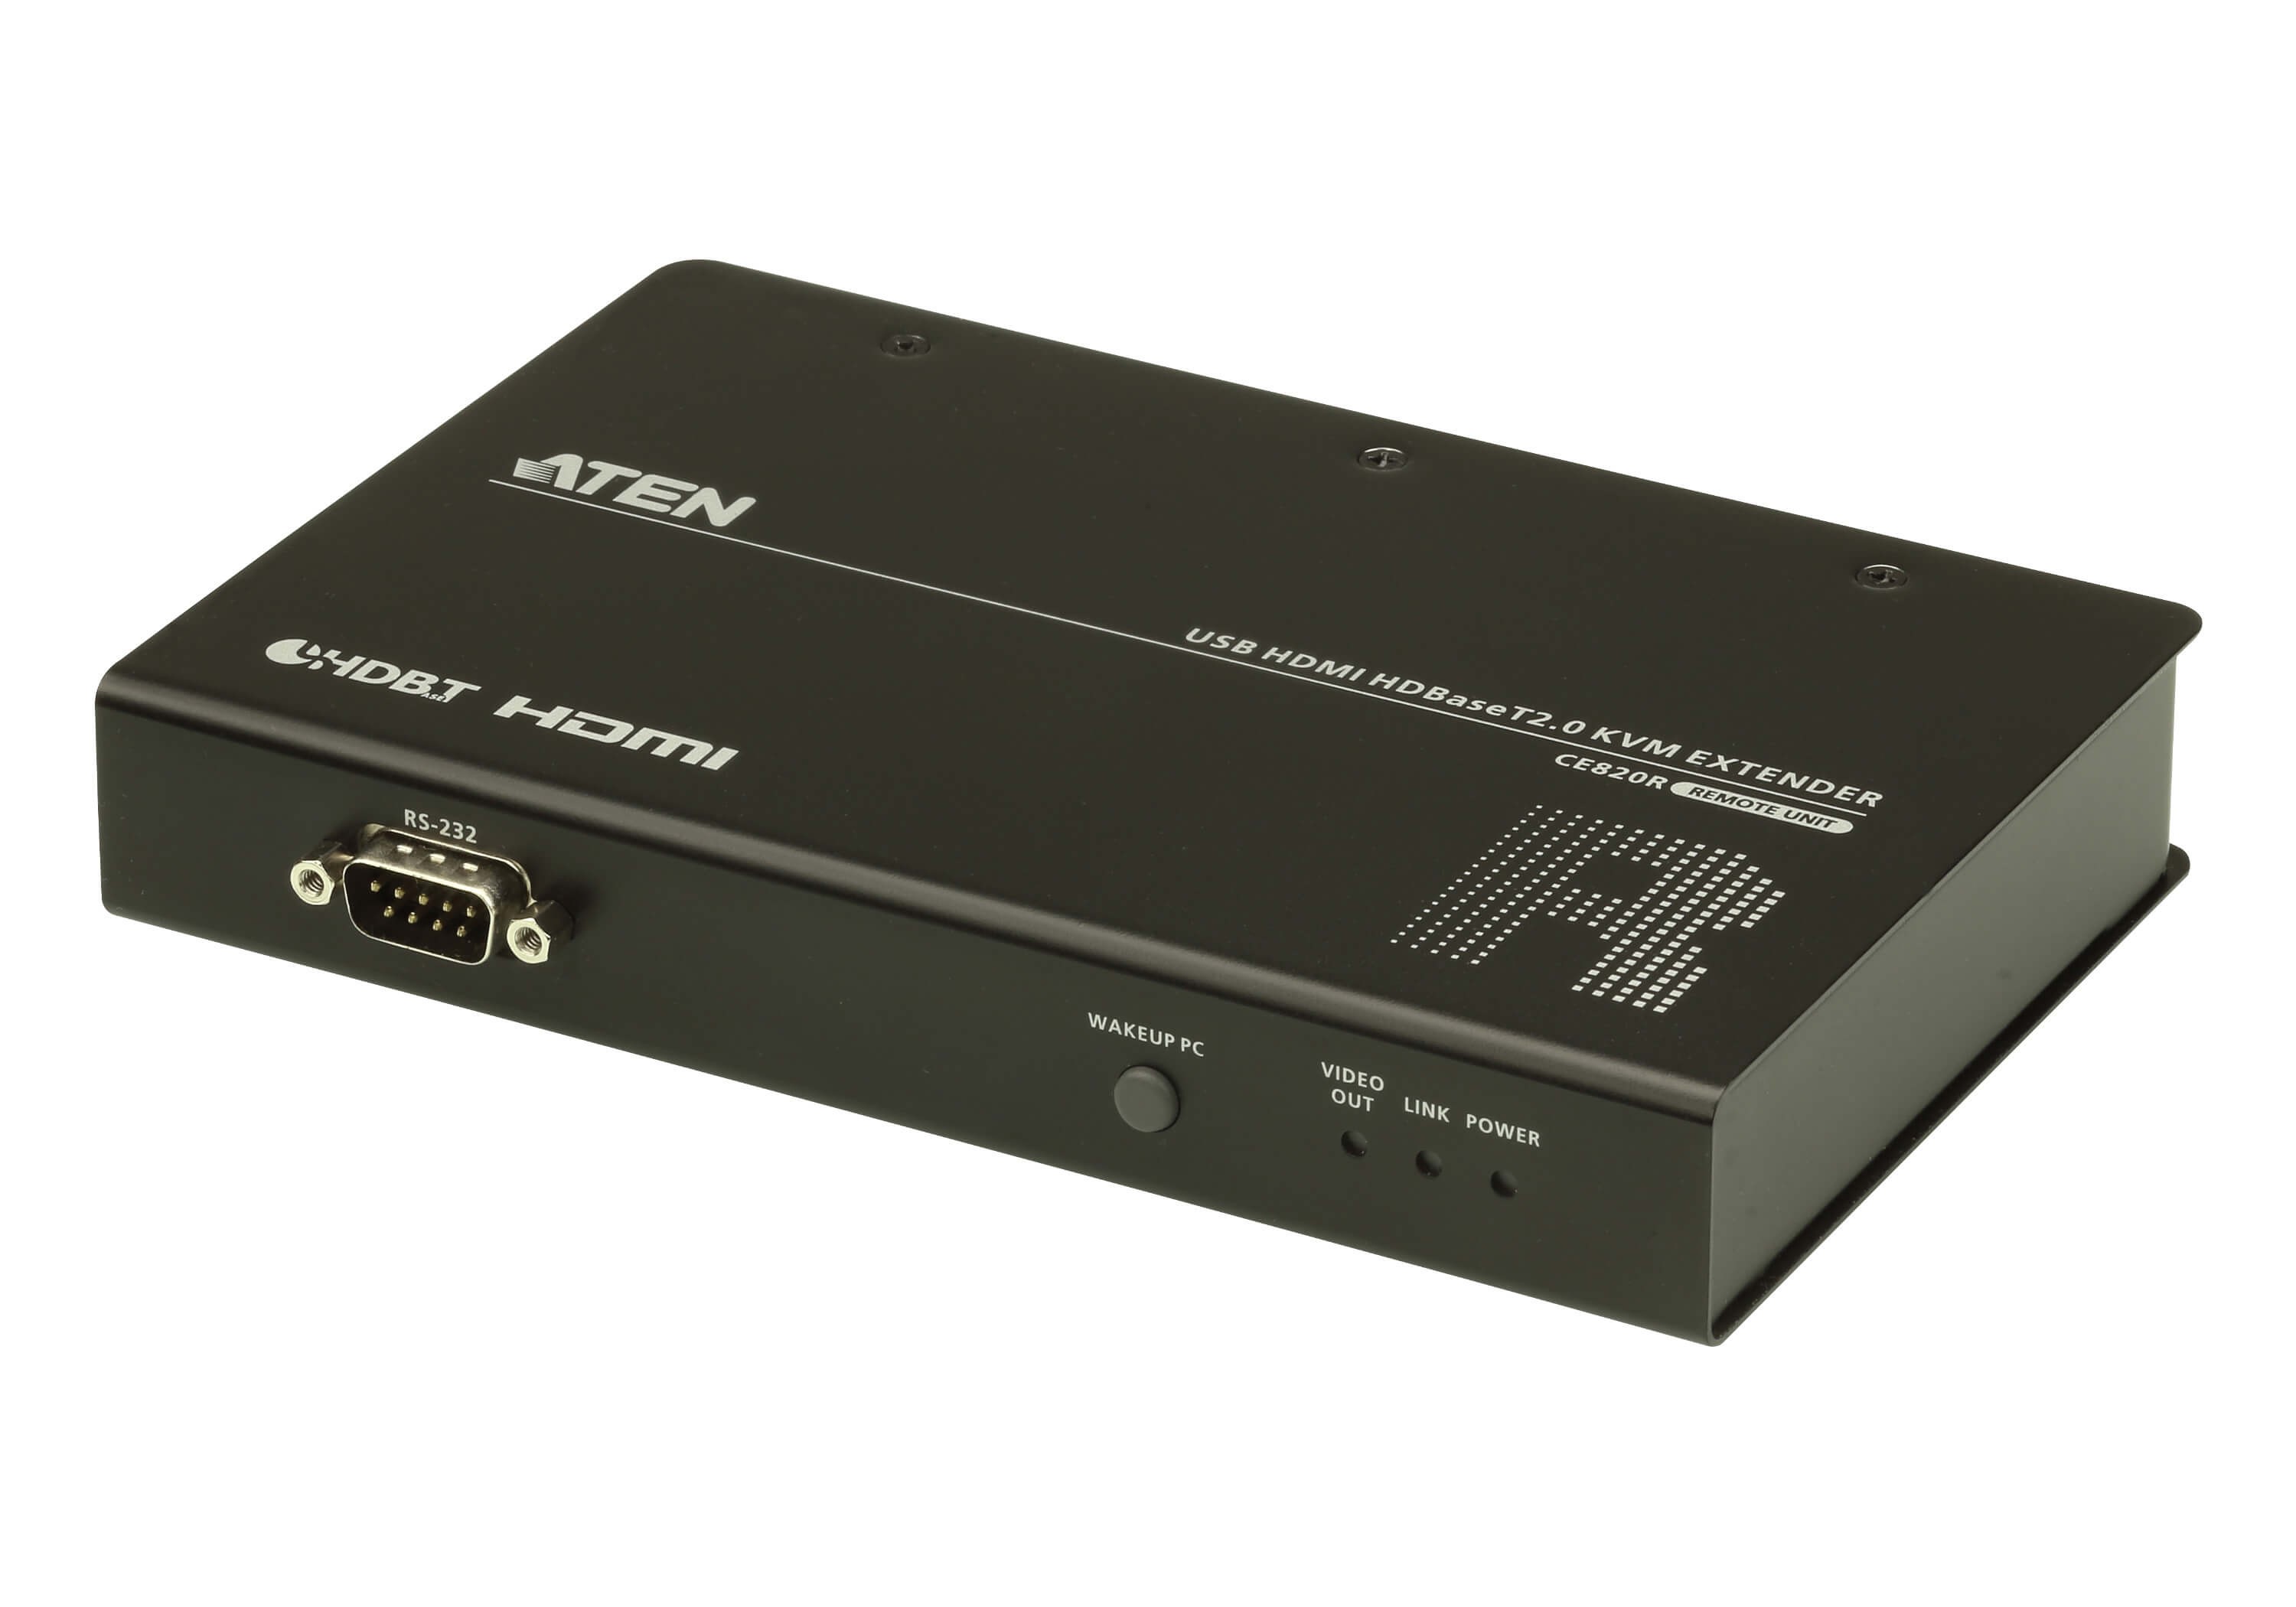 CE820R-ATA-G  USB HDMI HDBaseT? 2.0 KVM Extender (Remote Unit) (4K up to 100m) with USB Peripheral Support